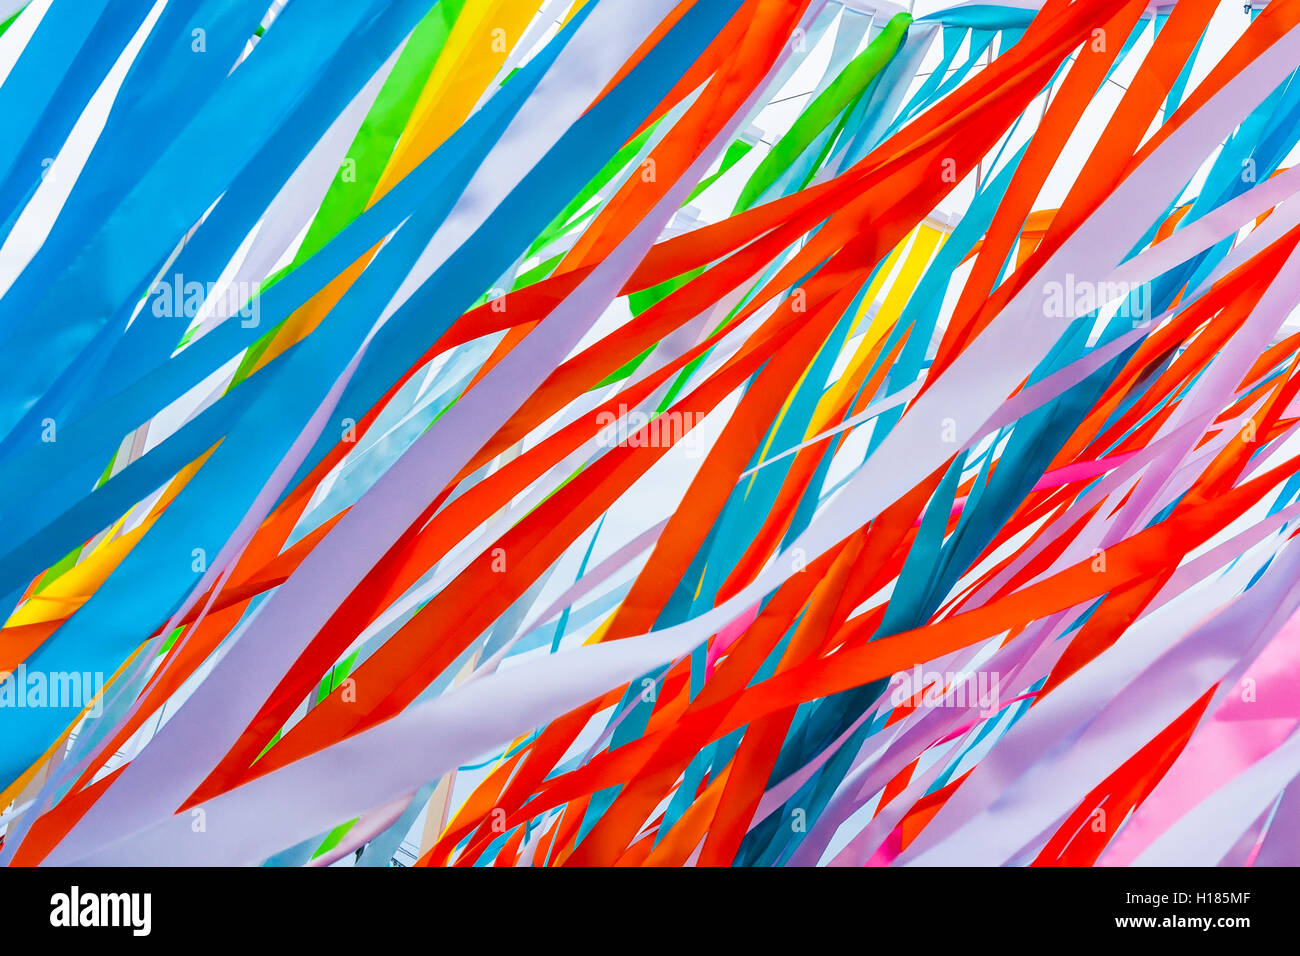 Colorful fabric ribbons wave in the wind. Play of red, blue, pink and other colors. Abstract pattern or texture Stock Photo